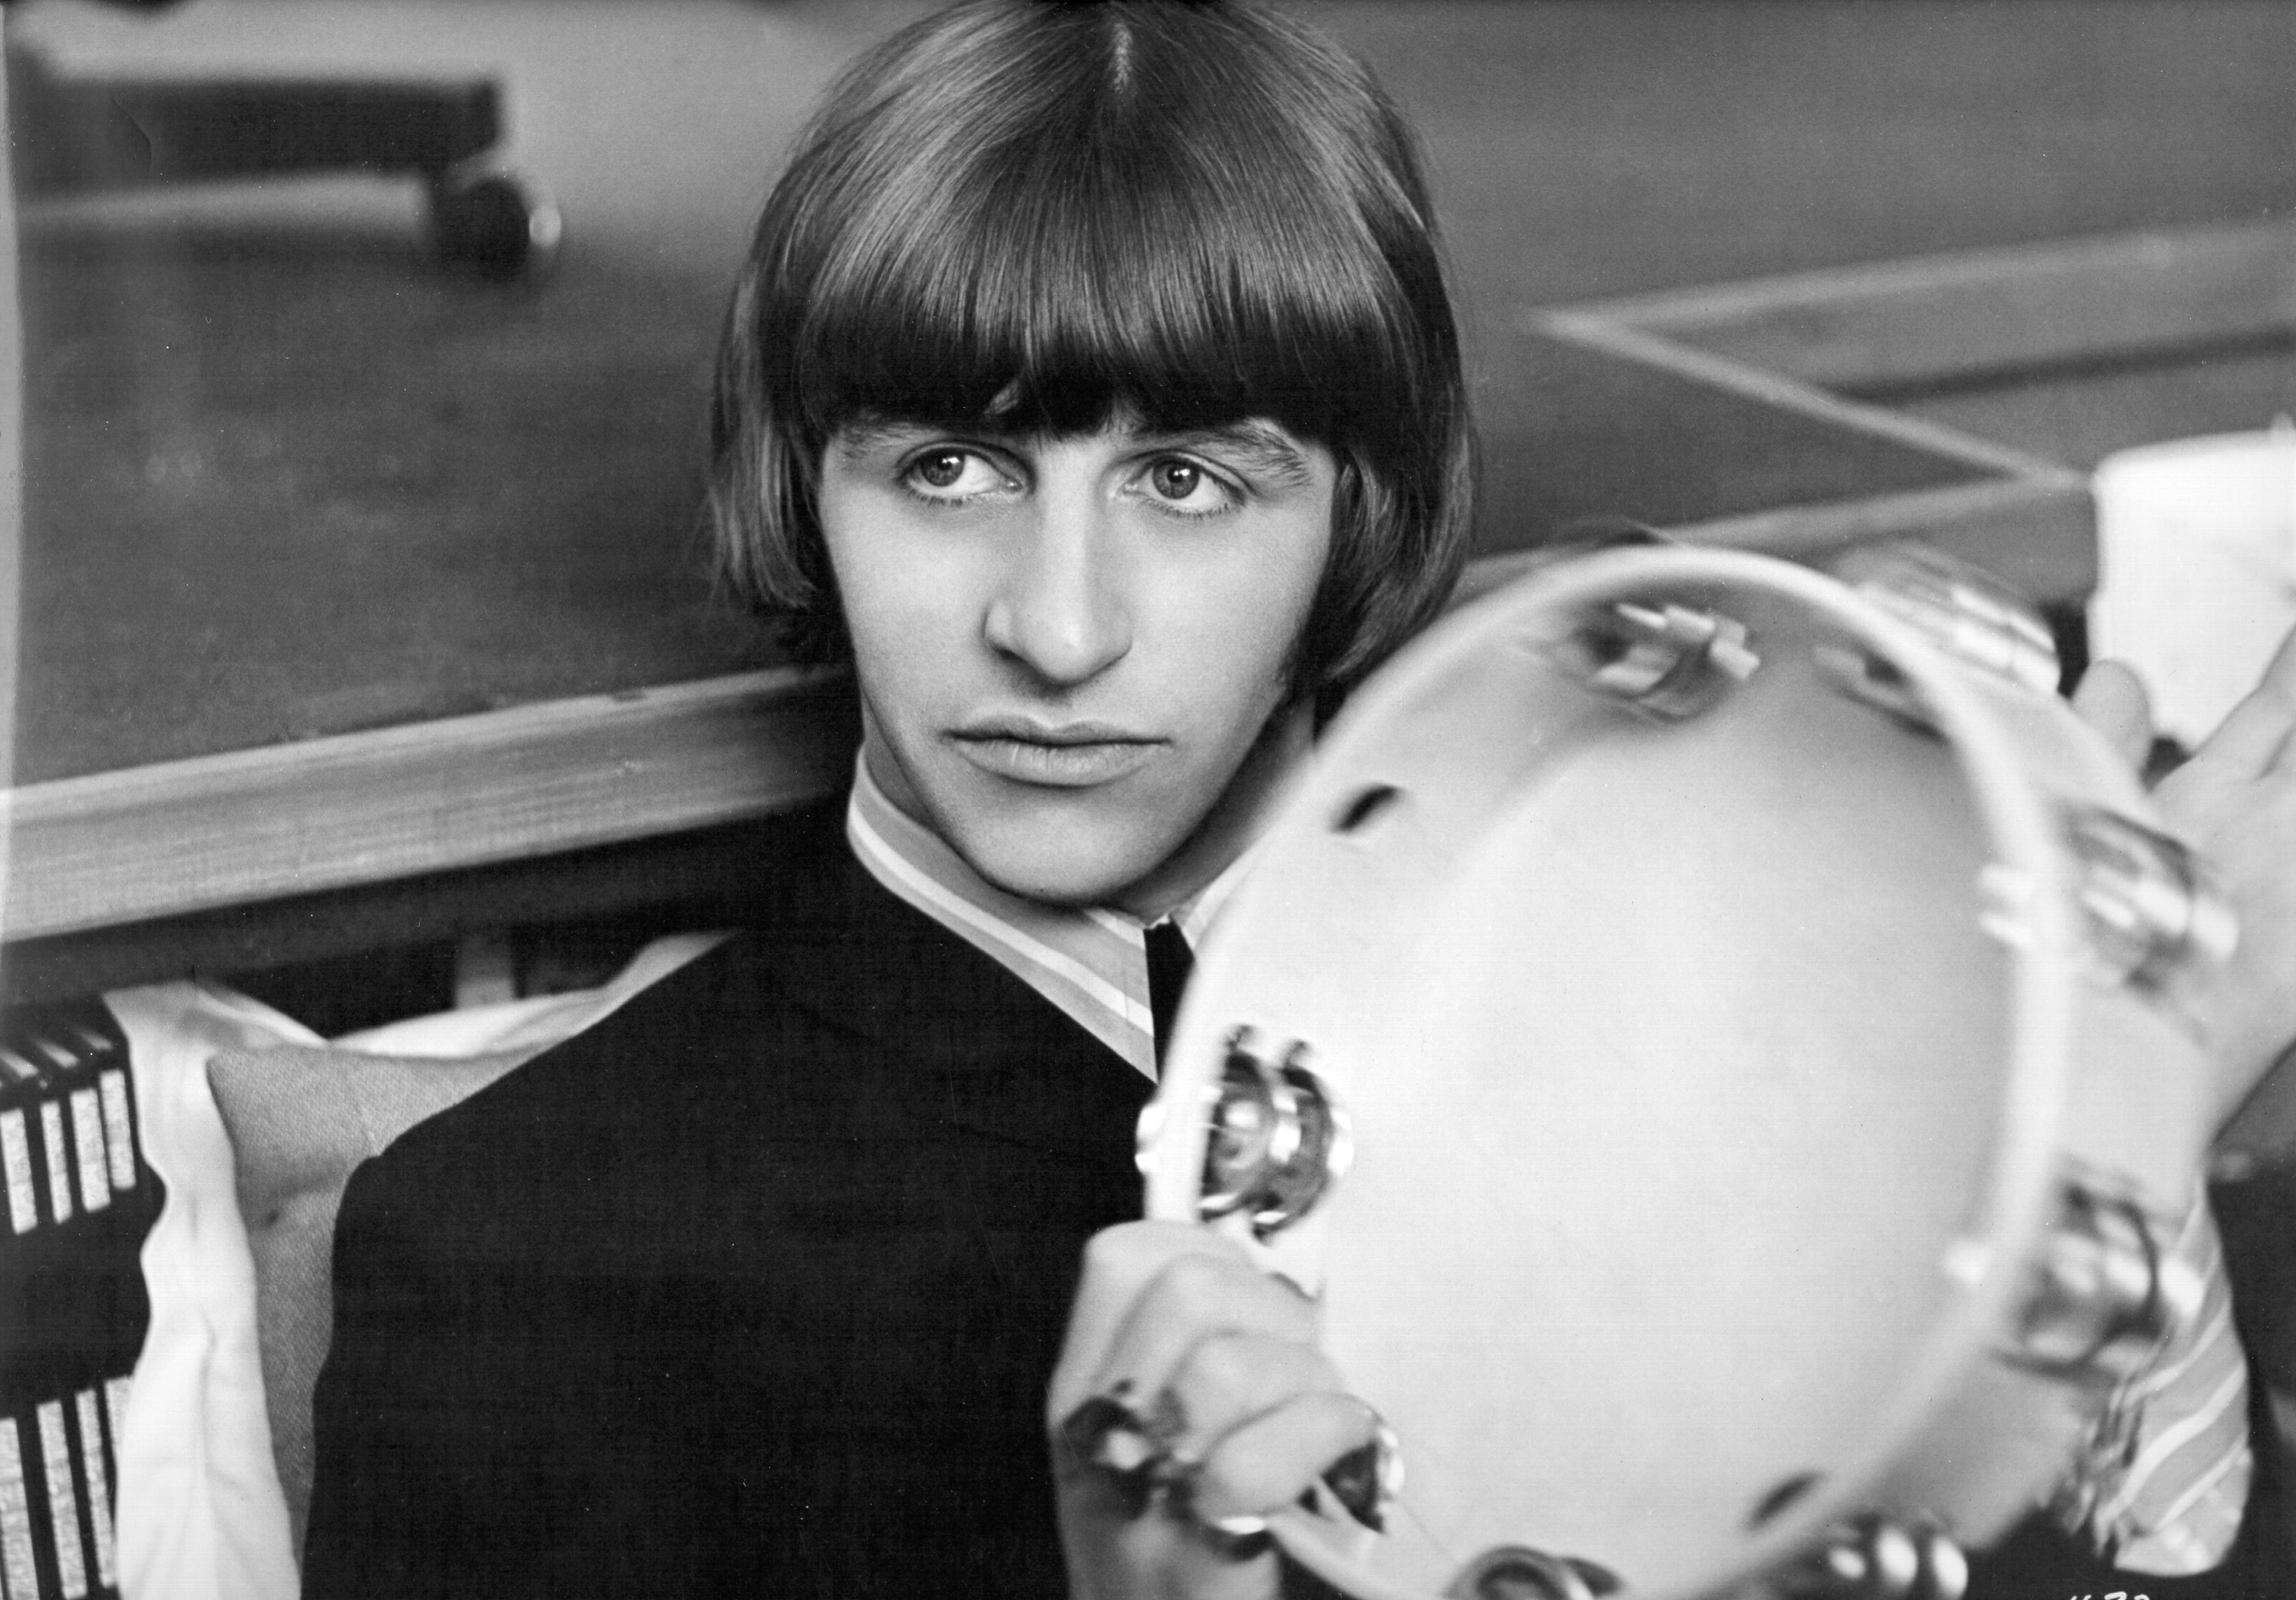 The Beatles' Ringo Starr and a tambourine